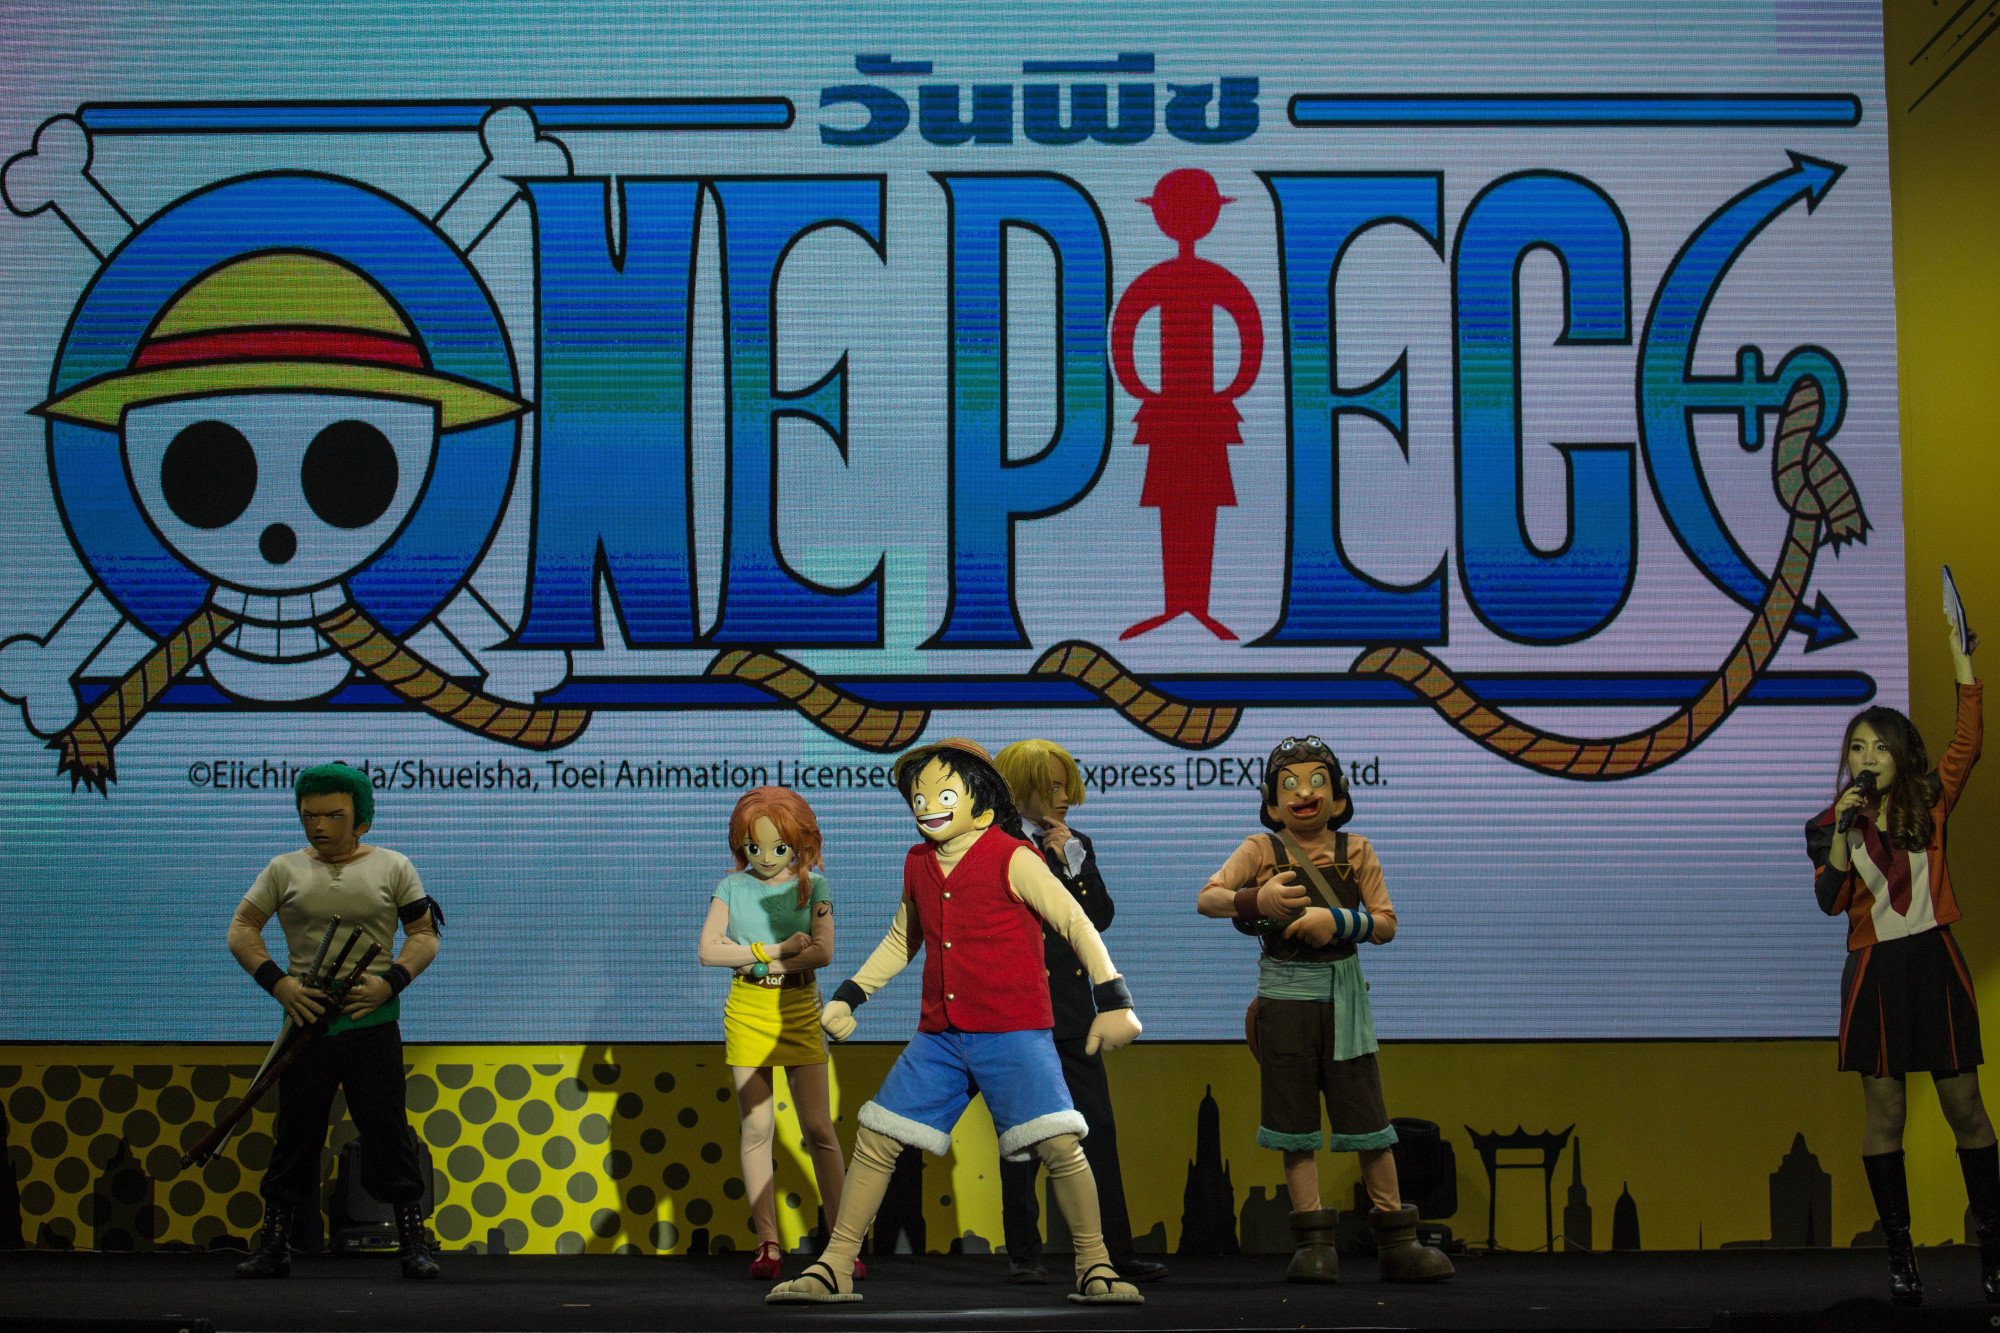 'One Piece' anime logo and cosplayers of Luffy D. Monkey and the Straw Hats.